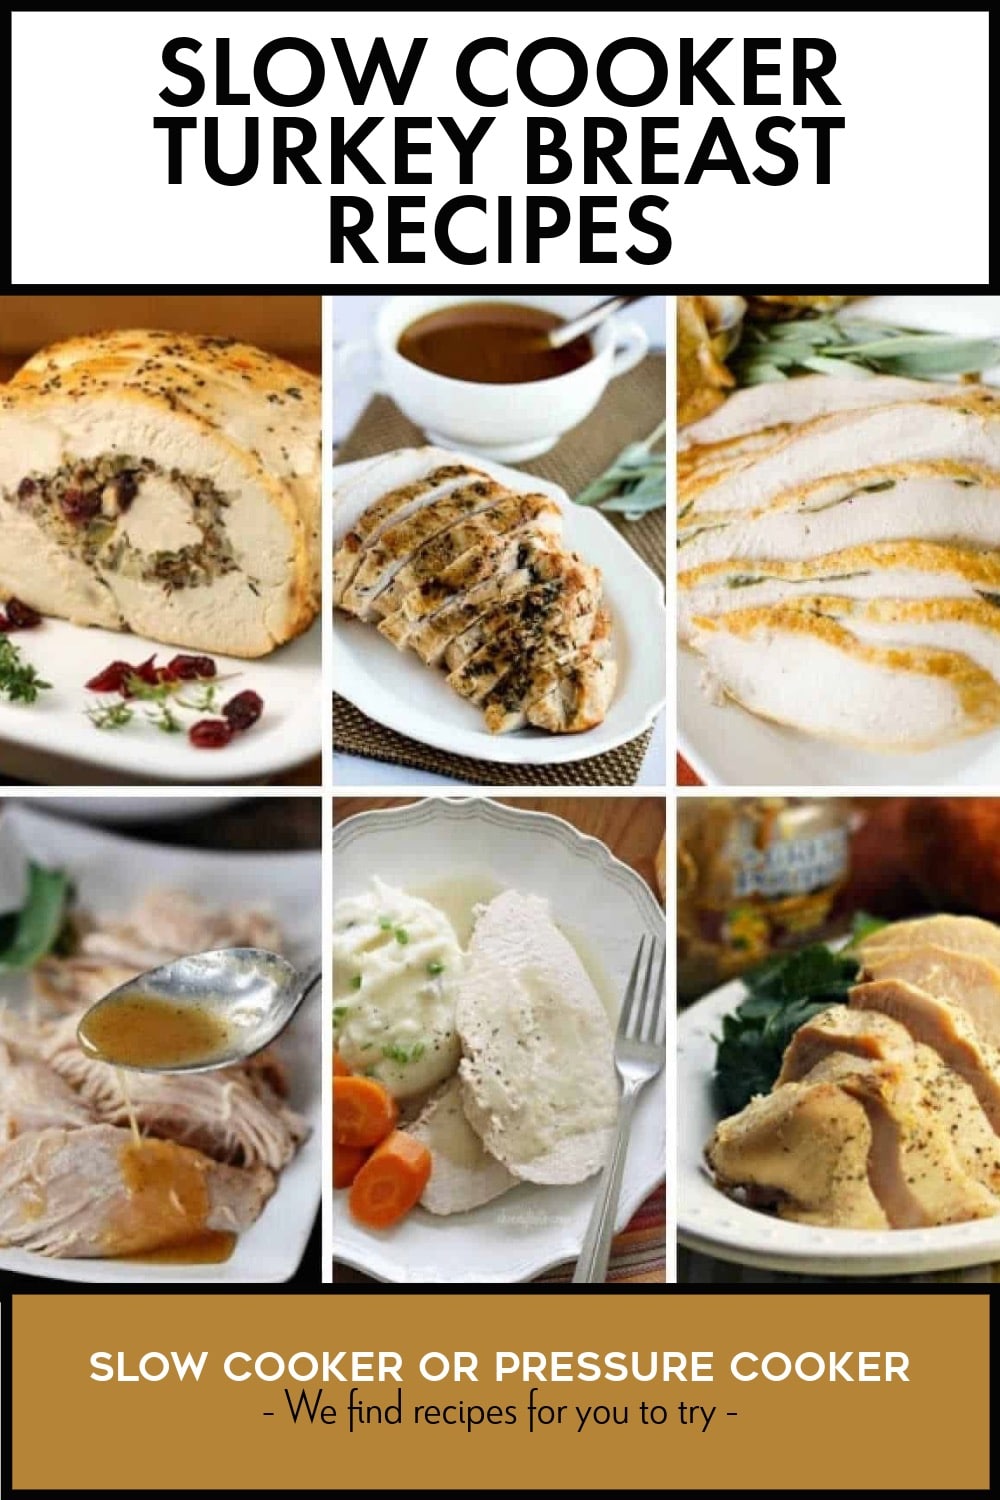 Pinterest image of Slow Cooker Turkey Breast Recipes